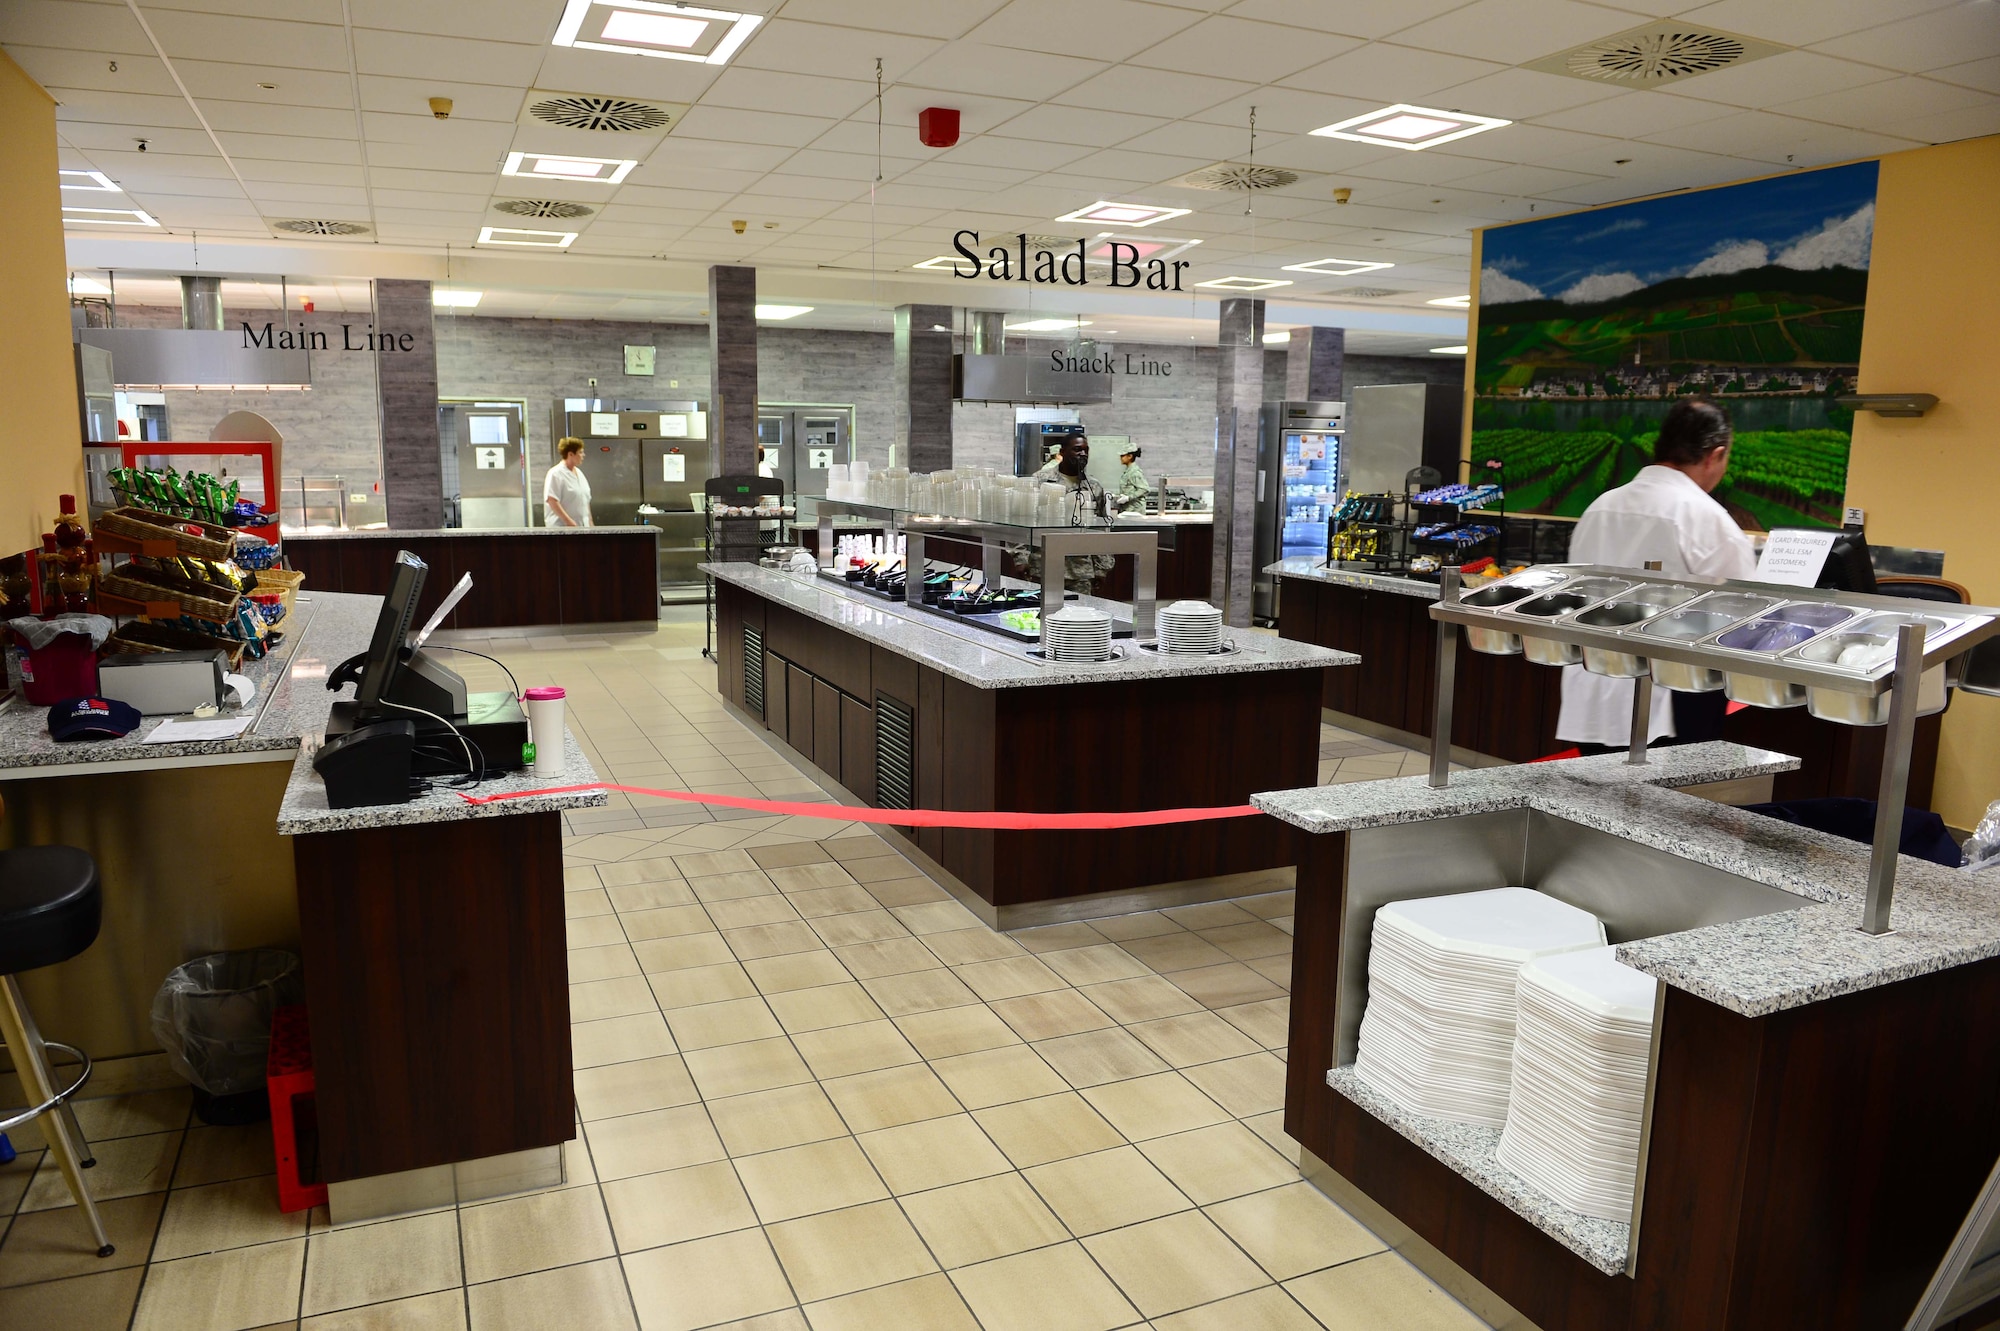 The Dining Facility at Spangdahlem Air Base opened its doors once again after several months of renovations that made meal service unavailable to the Saber community, April 10, 2017. Upgrades to the DFAC include new kitchen equipment like ovens and a walk in fridge, air conditioning installed in the kitchen, a new service line, repainting the walls and adding murals in the dining rooms to reflect the base's connection to the local community. (U.S. Air Force photo by Senior Airman Joshua R. M. Dewberry)